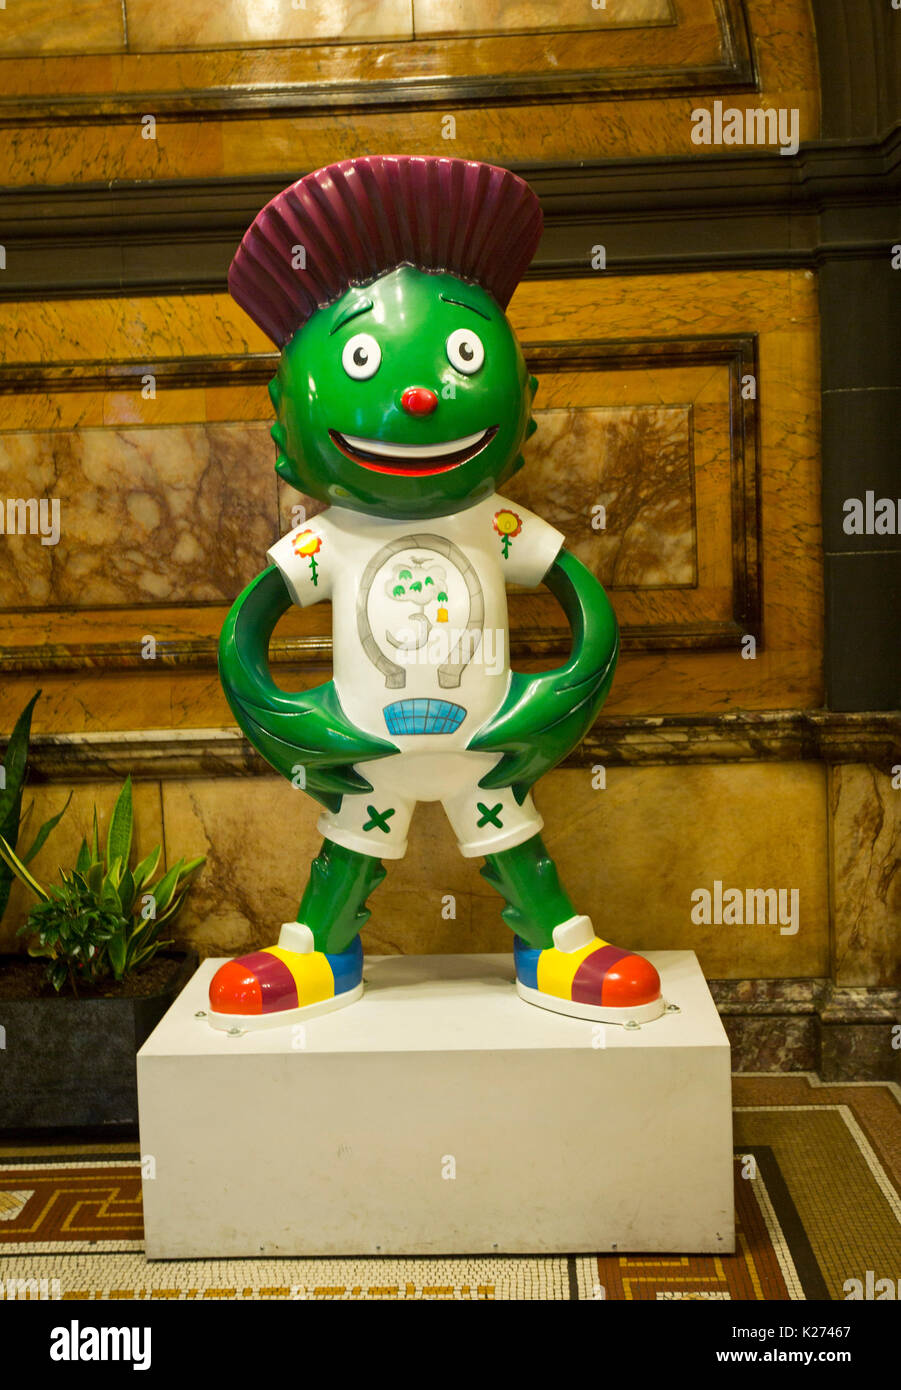 Clyde,a green fibreglass cartoon statue, official mascot of Commonwealth games 2014 in Glasgow, Scotland Stock Photo